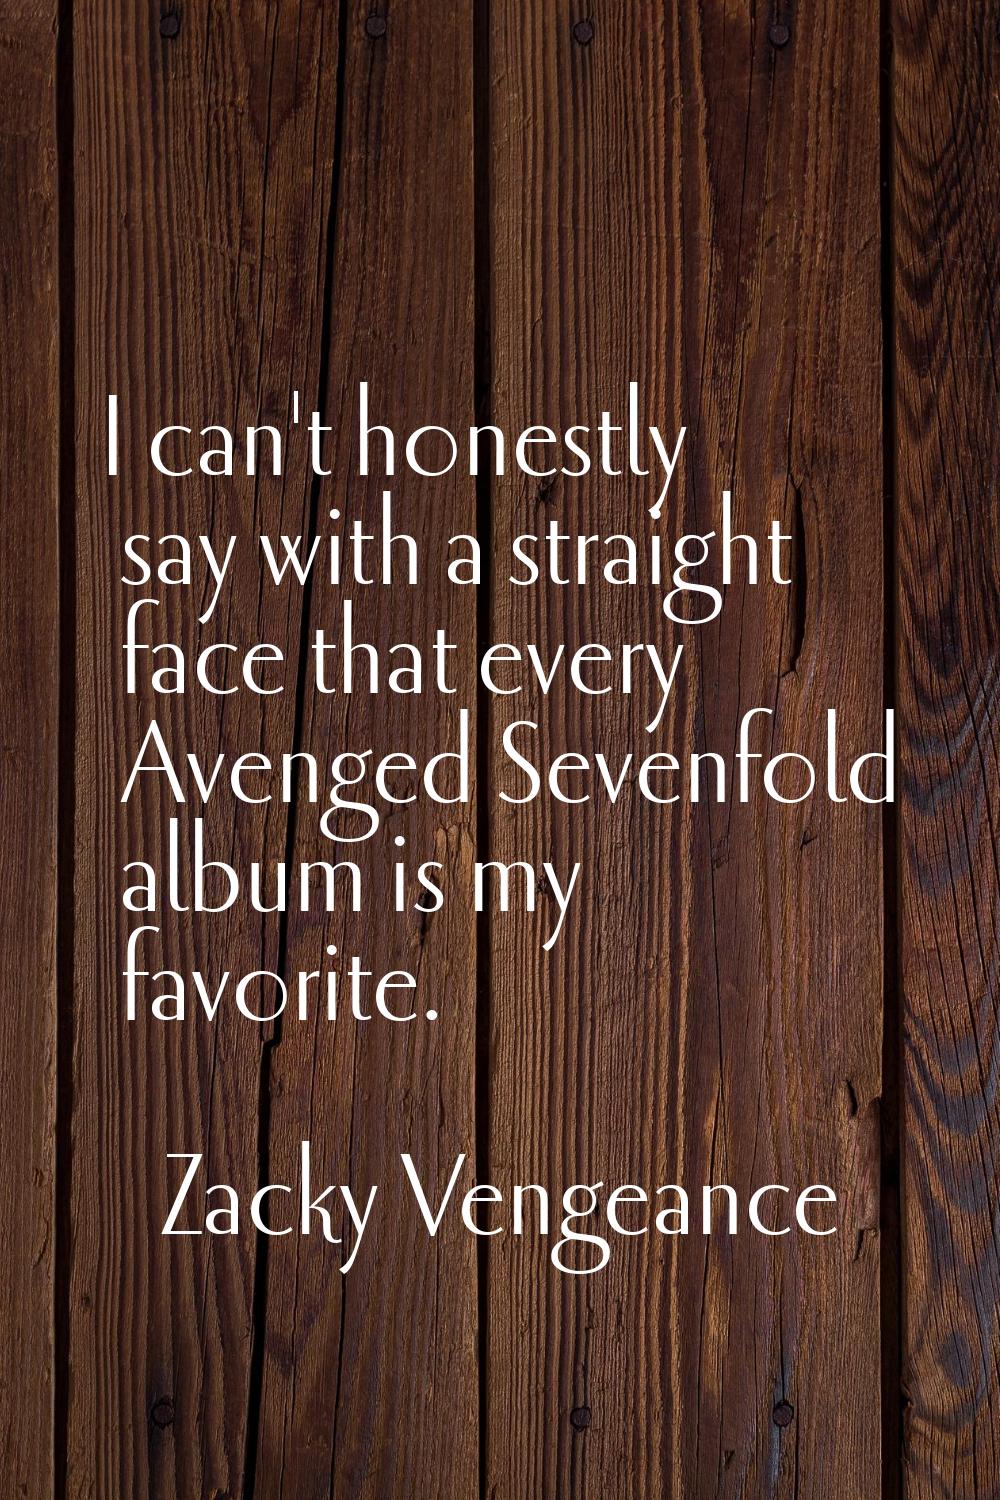 I can't honestly say with a straight face that every Avenged Sevenfold album is my favorite.